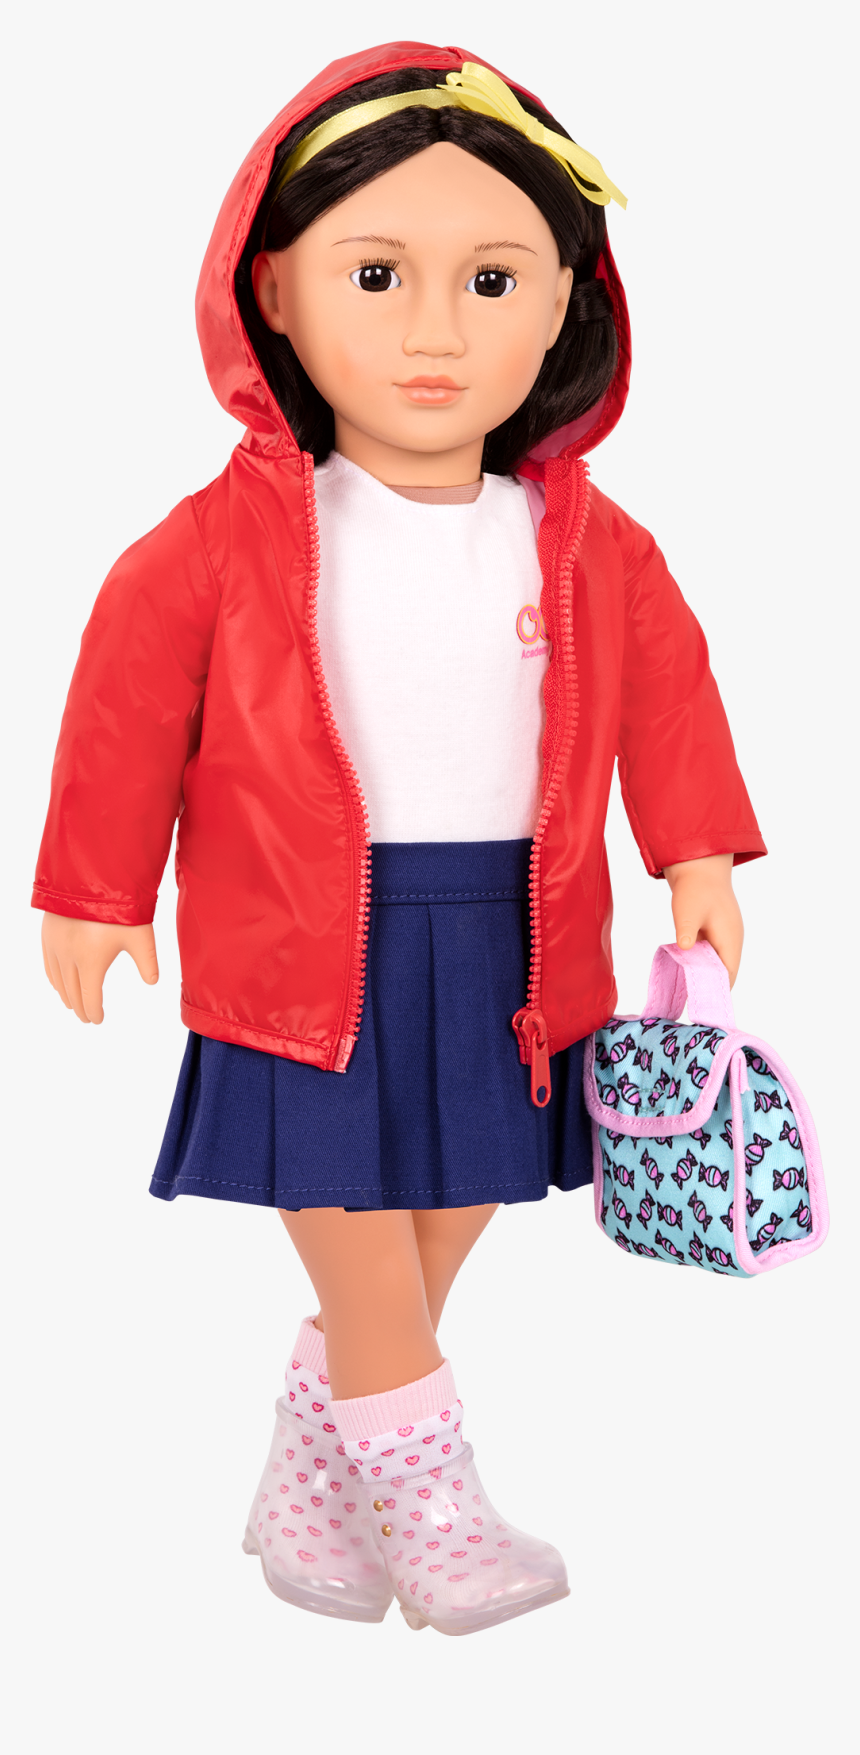 Aiko Wearing Rainy Recess School Outfit With Hood - Doll, HD Png Download, Free Download